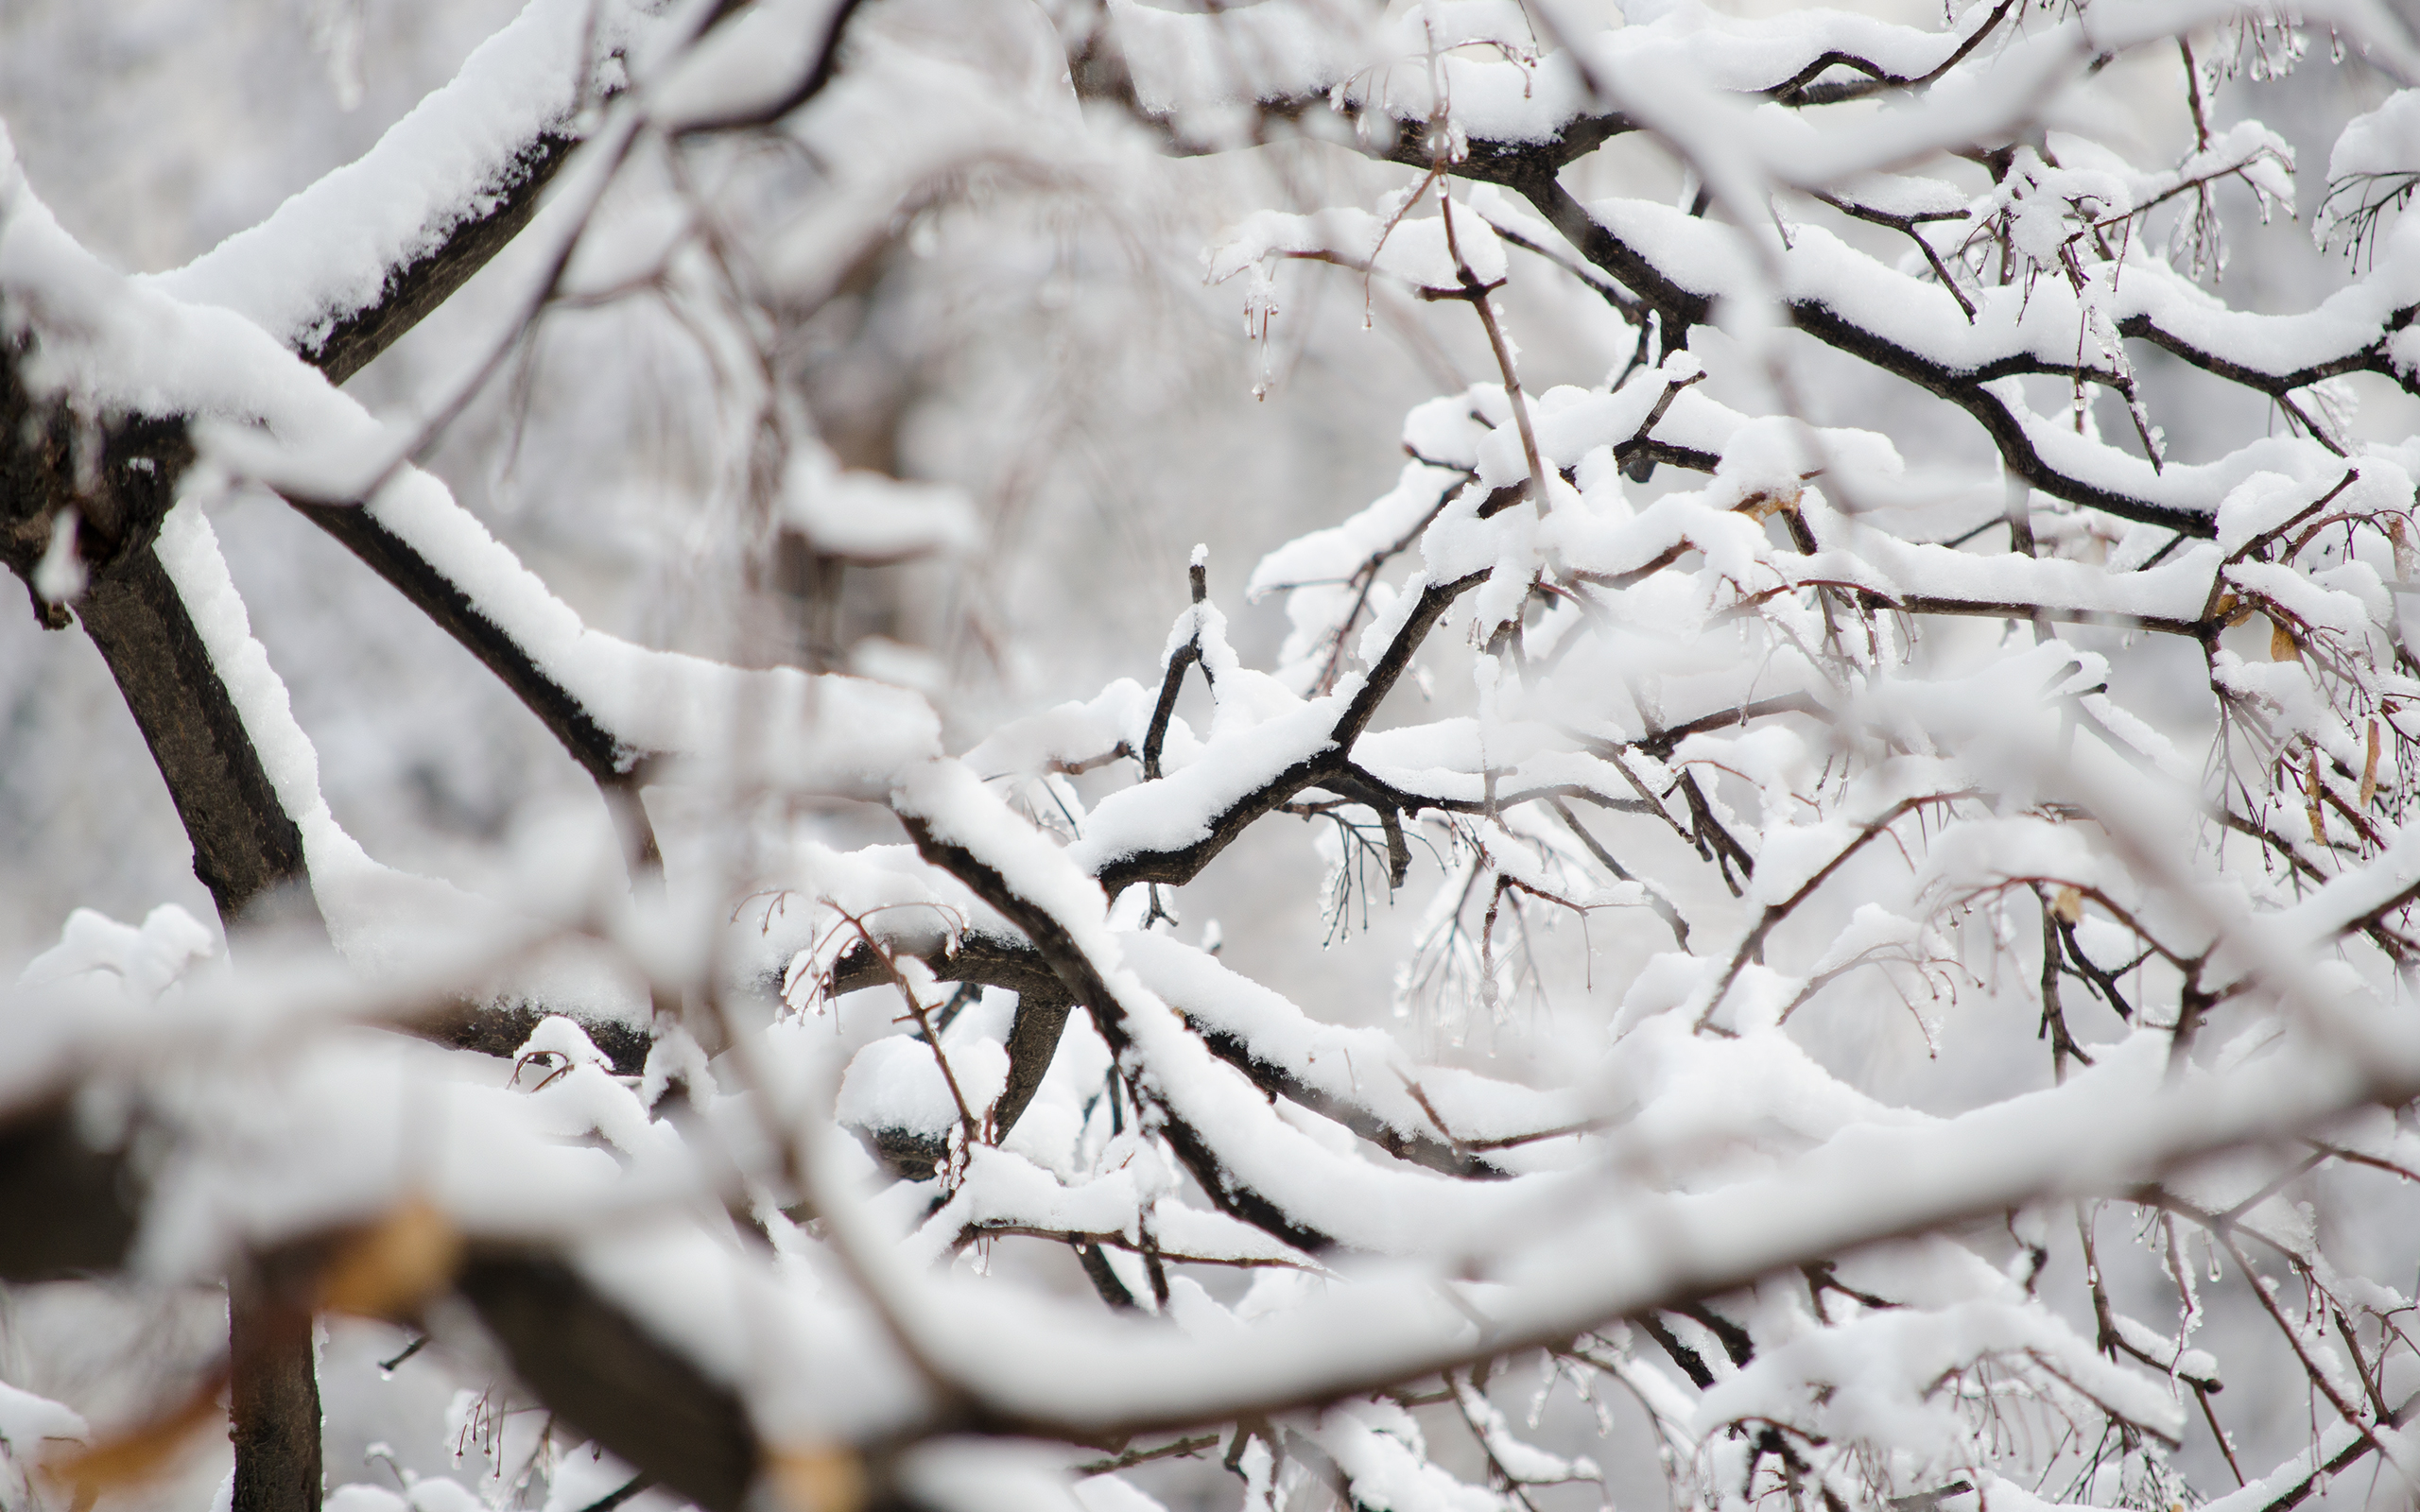 Snowy Branches wallpapers | Snowy Branches stock photos